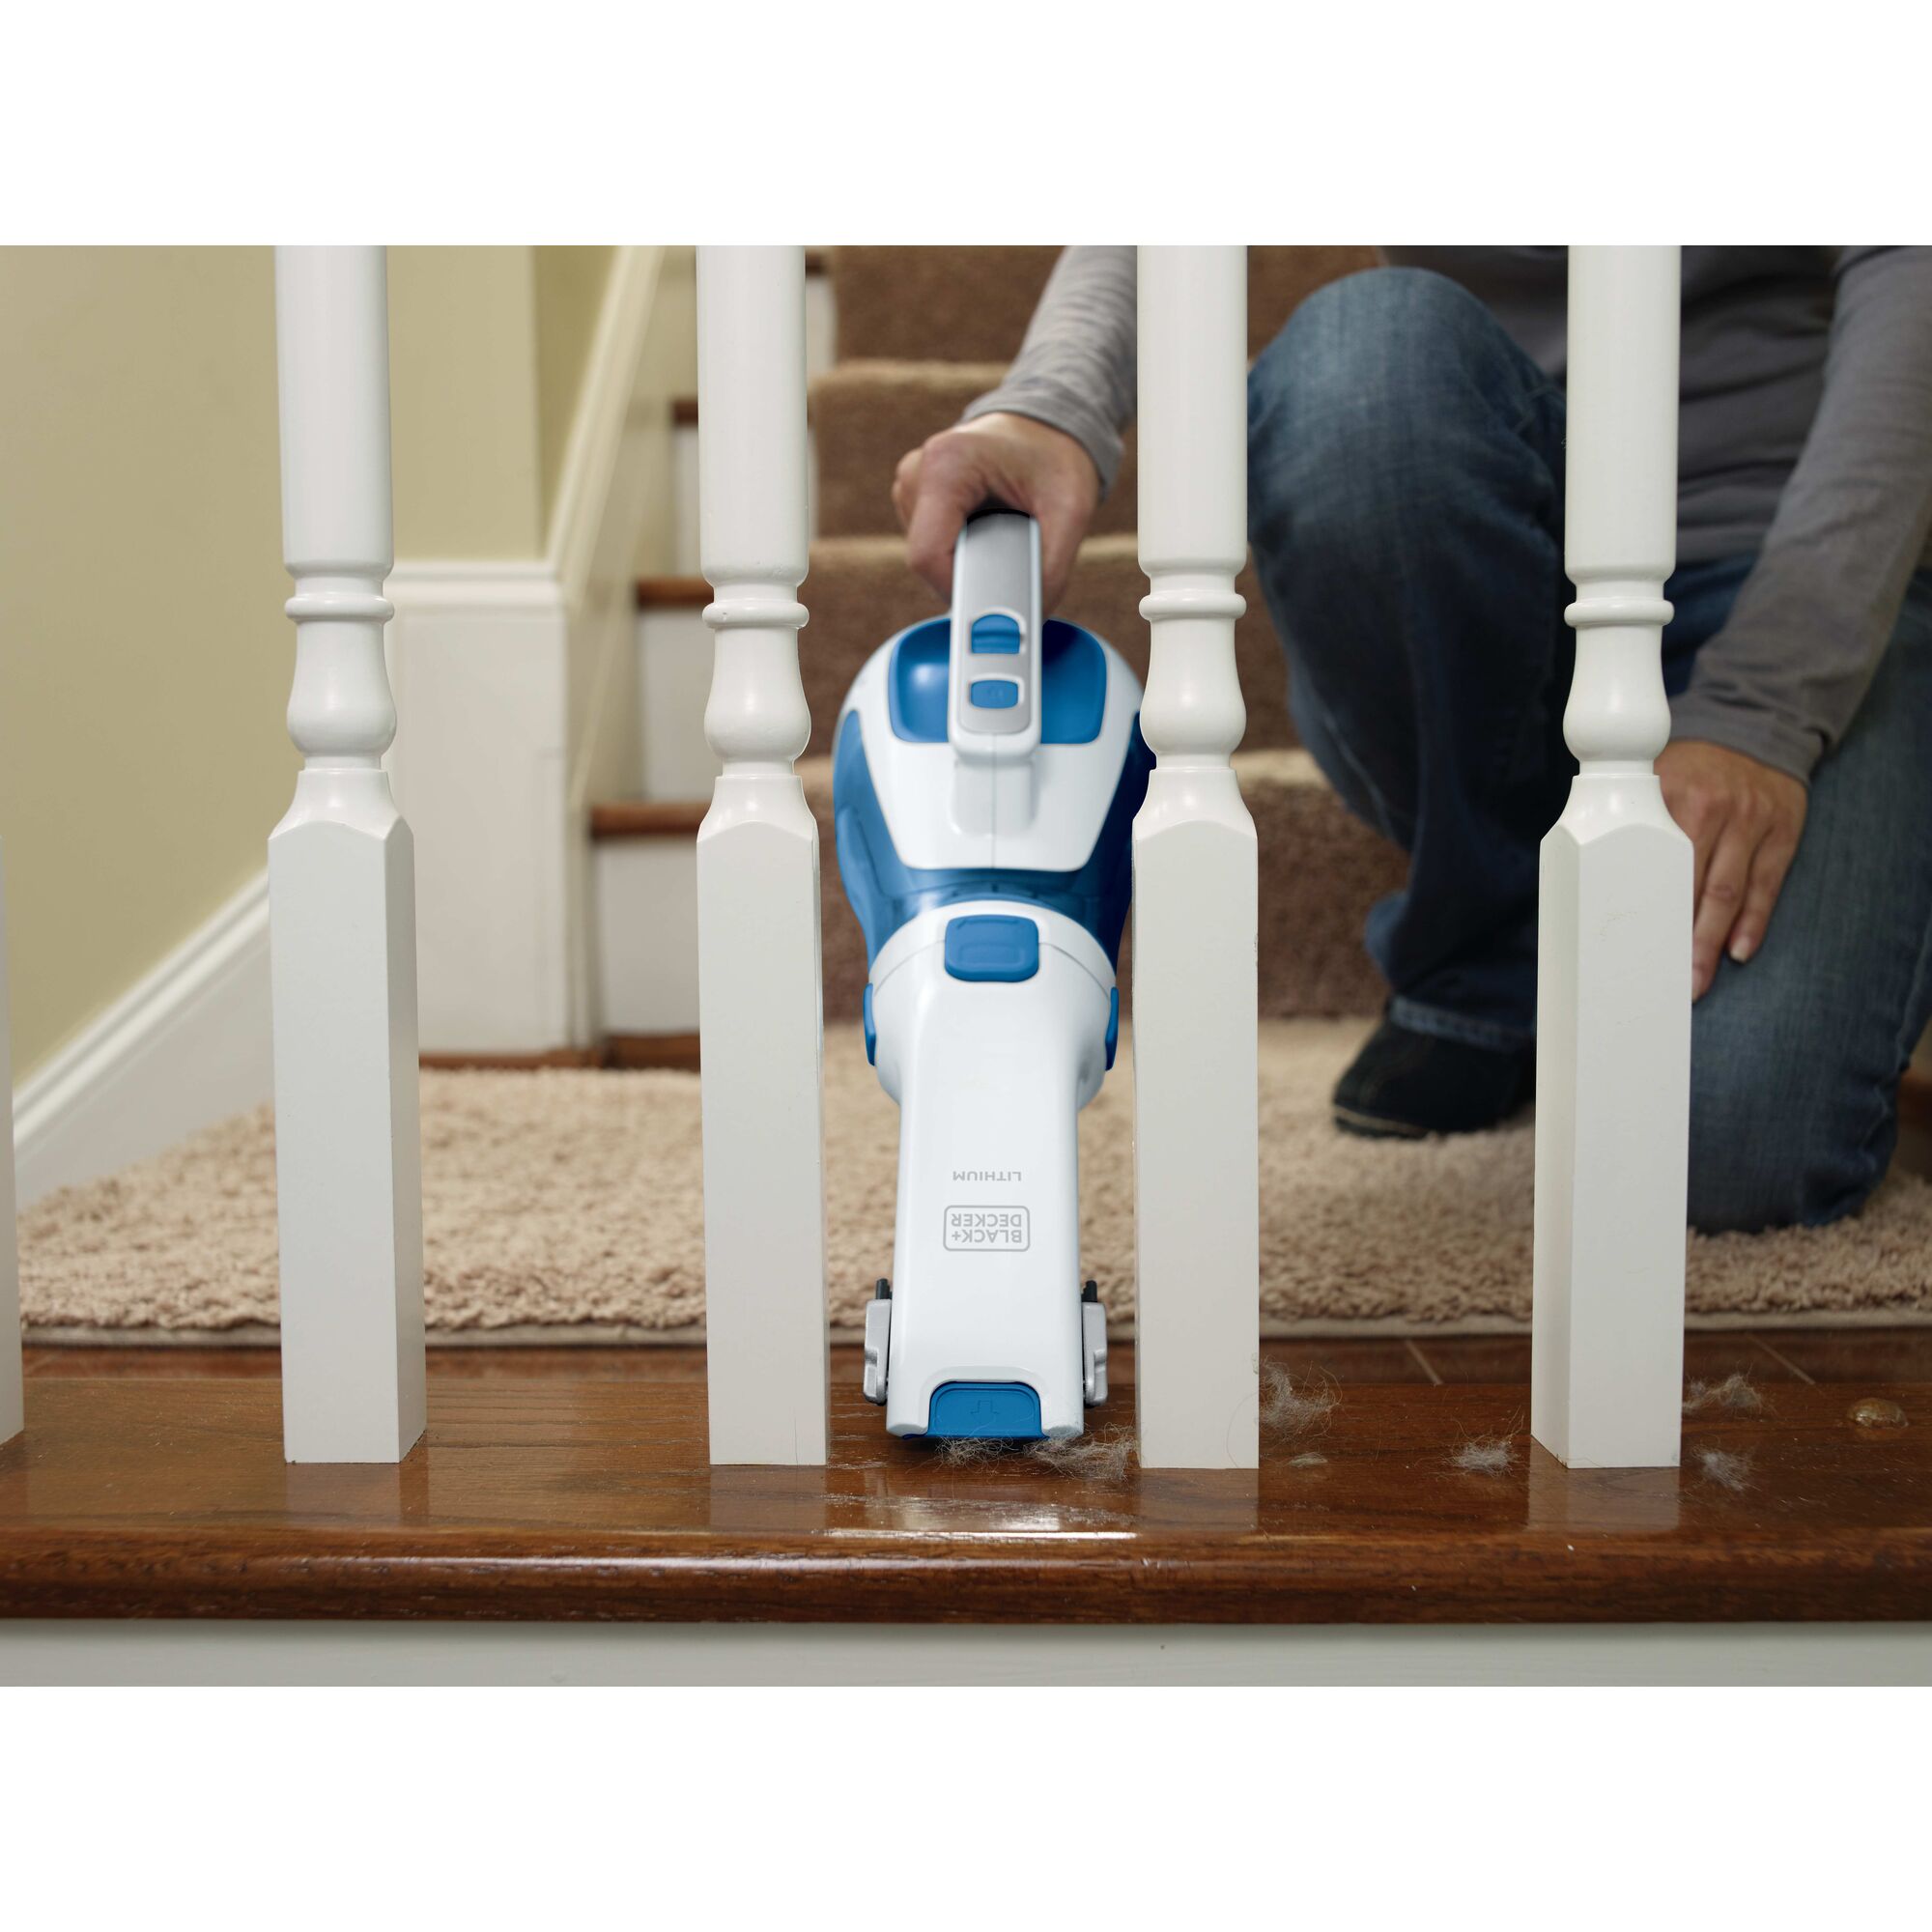 Reachable to tight places feature of a dustbuster cordless hand vacuum.